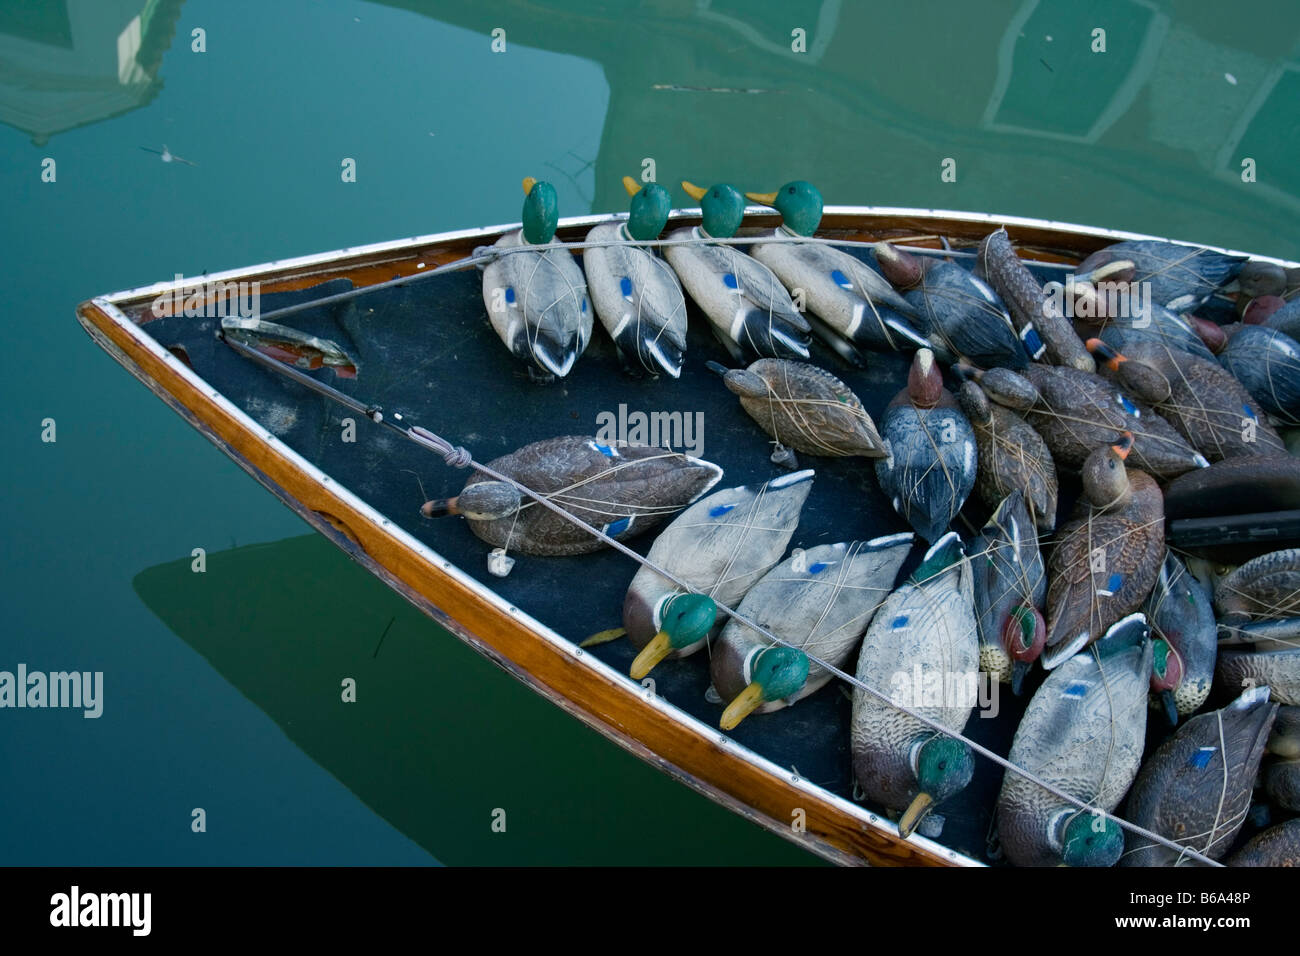 Boat loaded with dummy ducks (decoy) Stock Photo